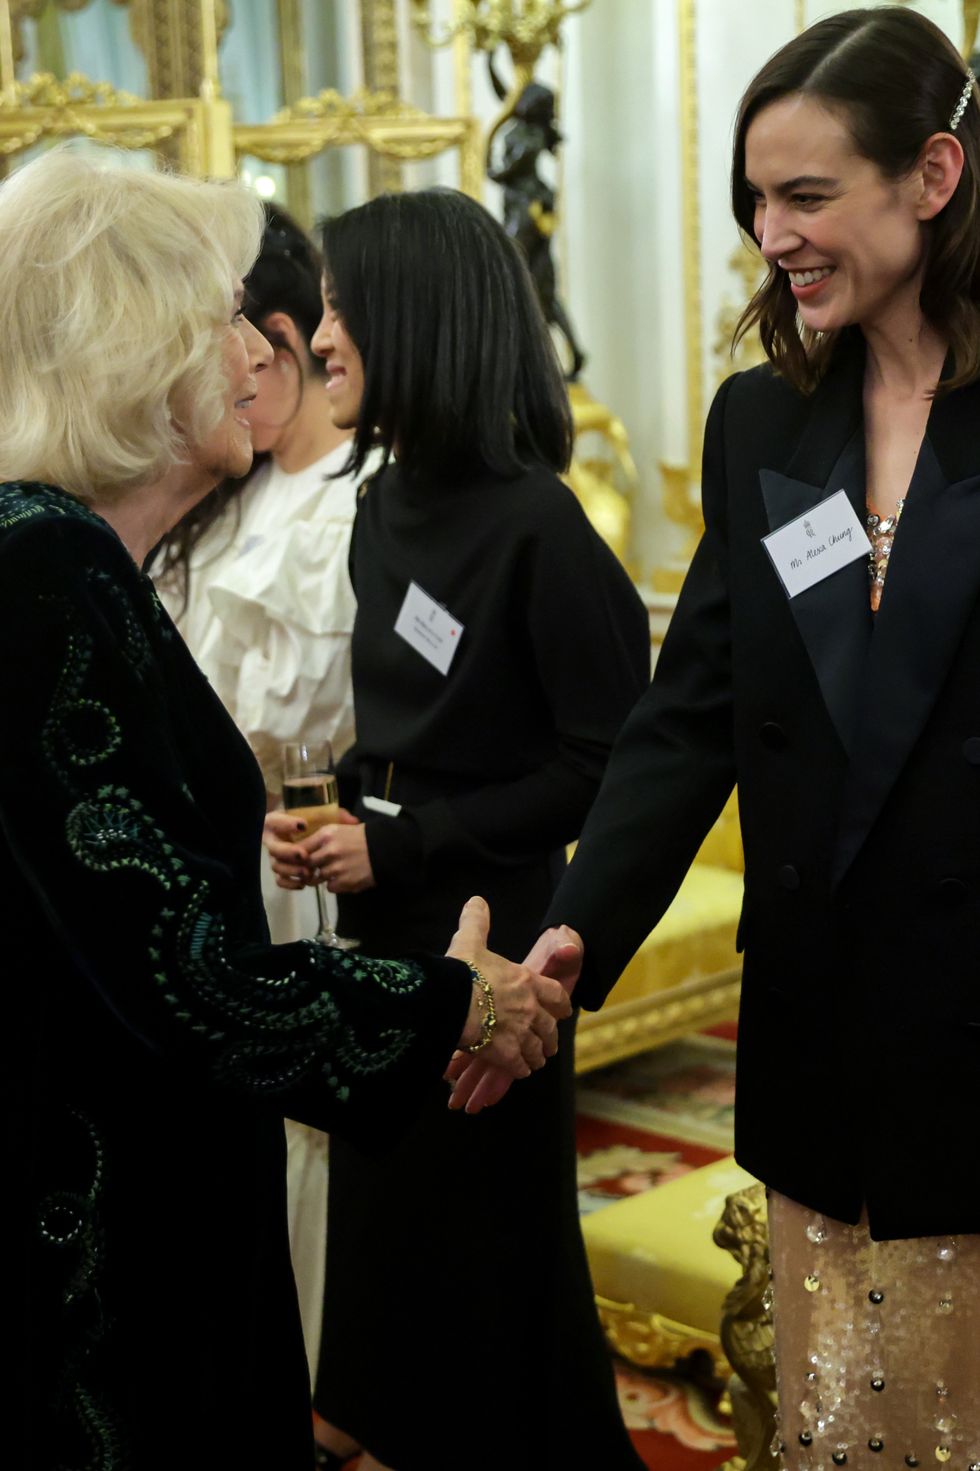 london, england february 01 camilla, queen consort shakes hands with alexa chung during a reception hosted by the king and the queen consort to celebrate british east and south east asian communities at buckingham palace on february 01, 2023 in london, england the reception is taking place shortly after lunar new year, the holiday began as a time for feasting and to honour household and heavenly deities, as well as ancestors guests include representatives of the armed forces, the arts, media, fashion, business, government, finance, healthcare, faith organisations and charities photo by chris jackson wpa poolgetty images